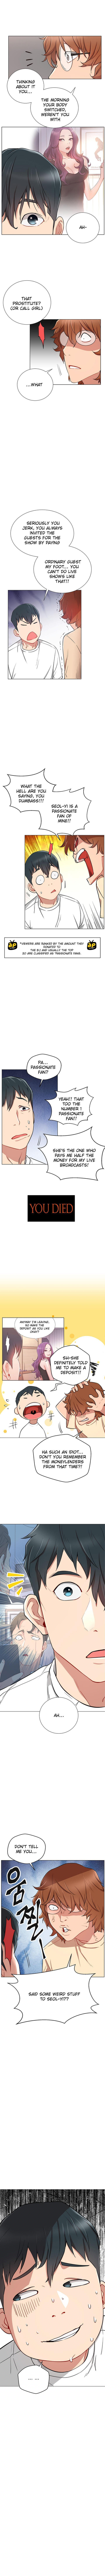 Romance LIVE WITH : DO YOU WANT TO DO IT Ch. 7 Nice - Page 7